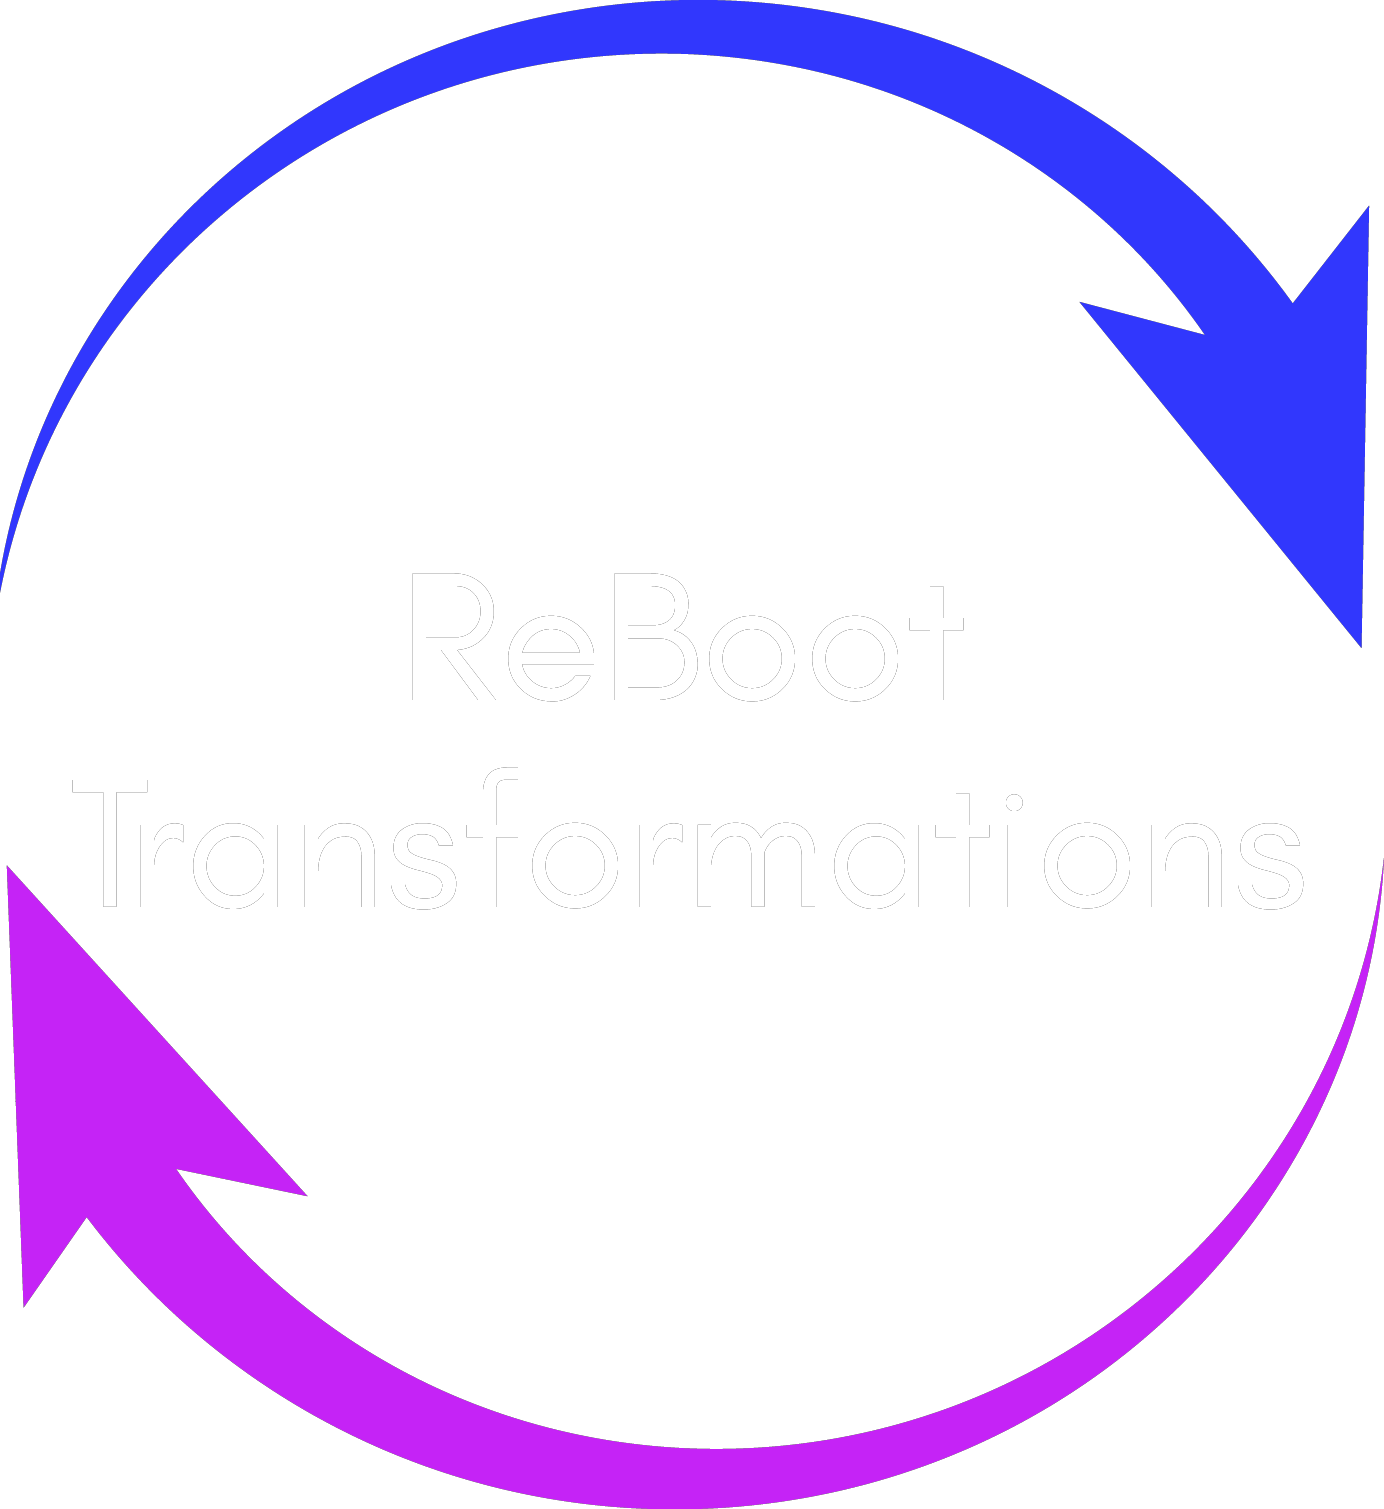 ReBoot Transformations Logo Final - White and Colours